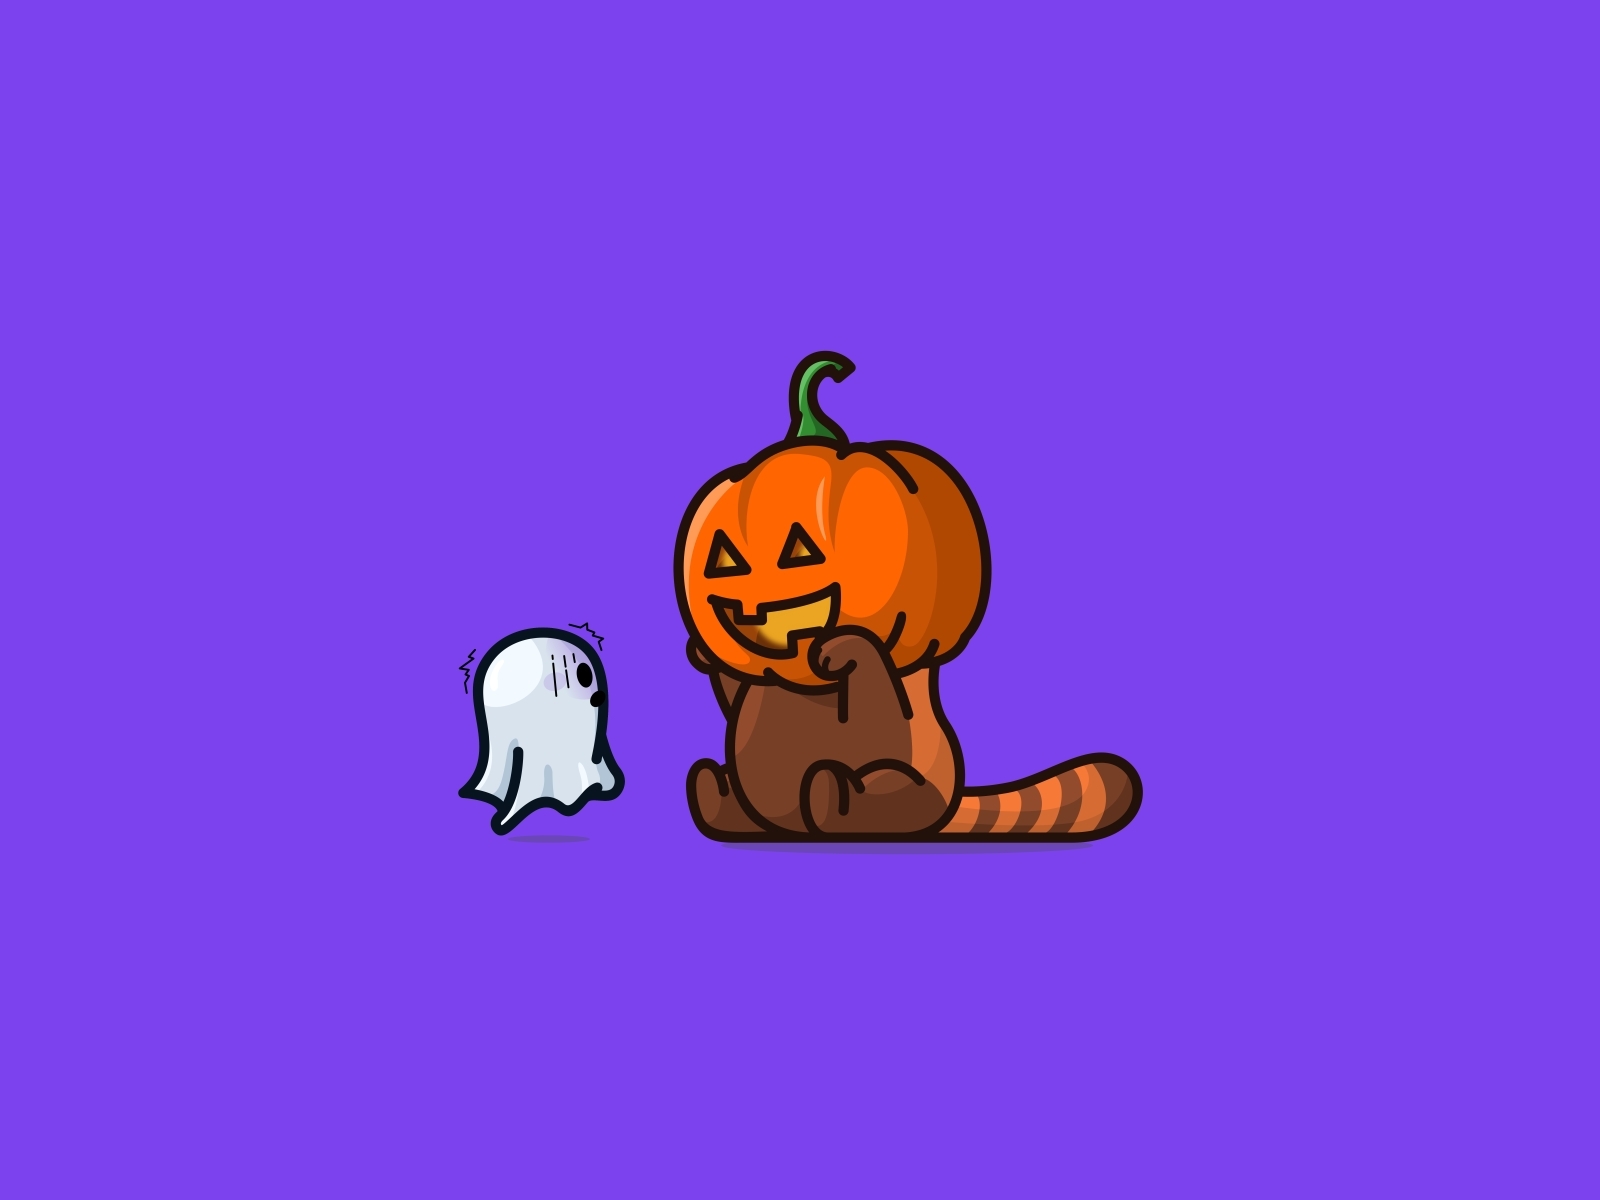 red panda pumkin and the ghost halloween theme by Ard on Dribbble